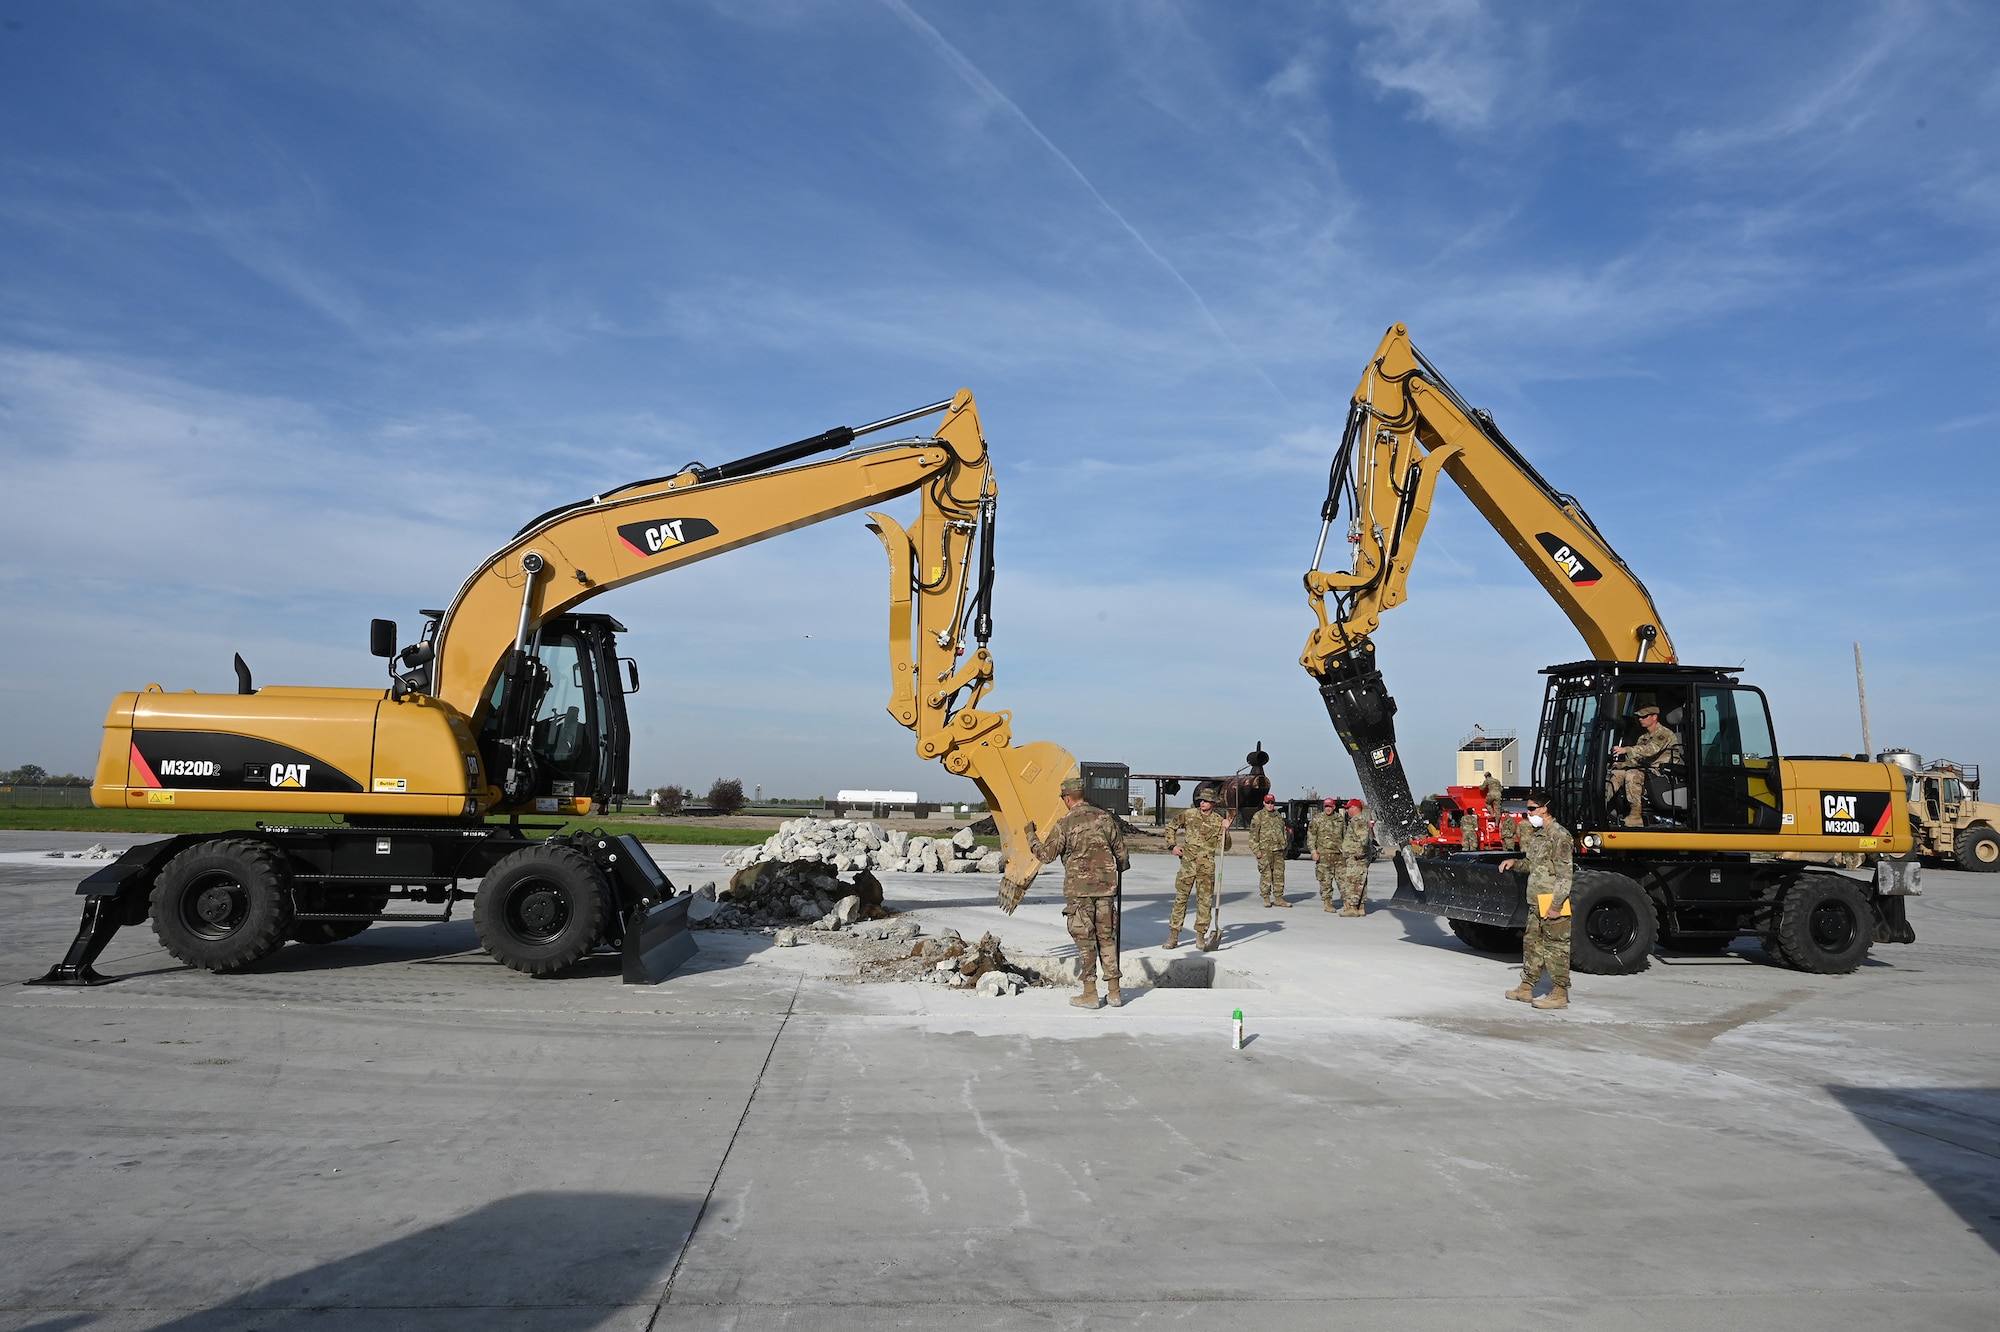 Two large excavators are used by military members to repair holes in a concrete training runway at the North Dakota Air National Guard Regional Training Site, Fargo, N.D., Sept. 29, 2021.